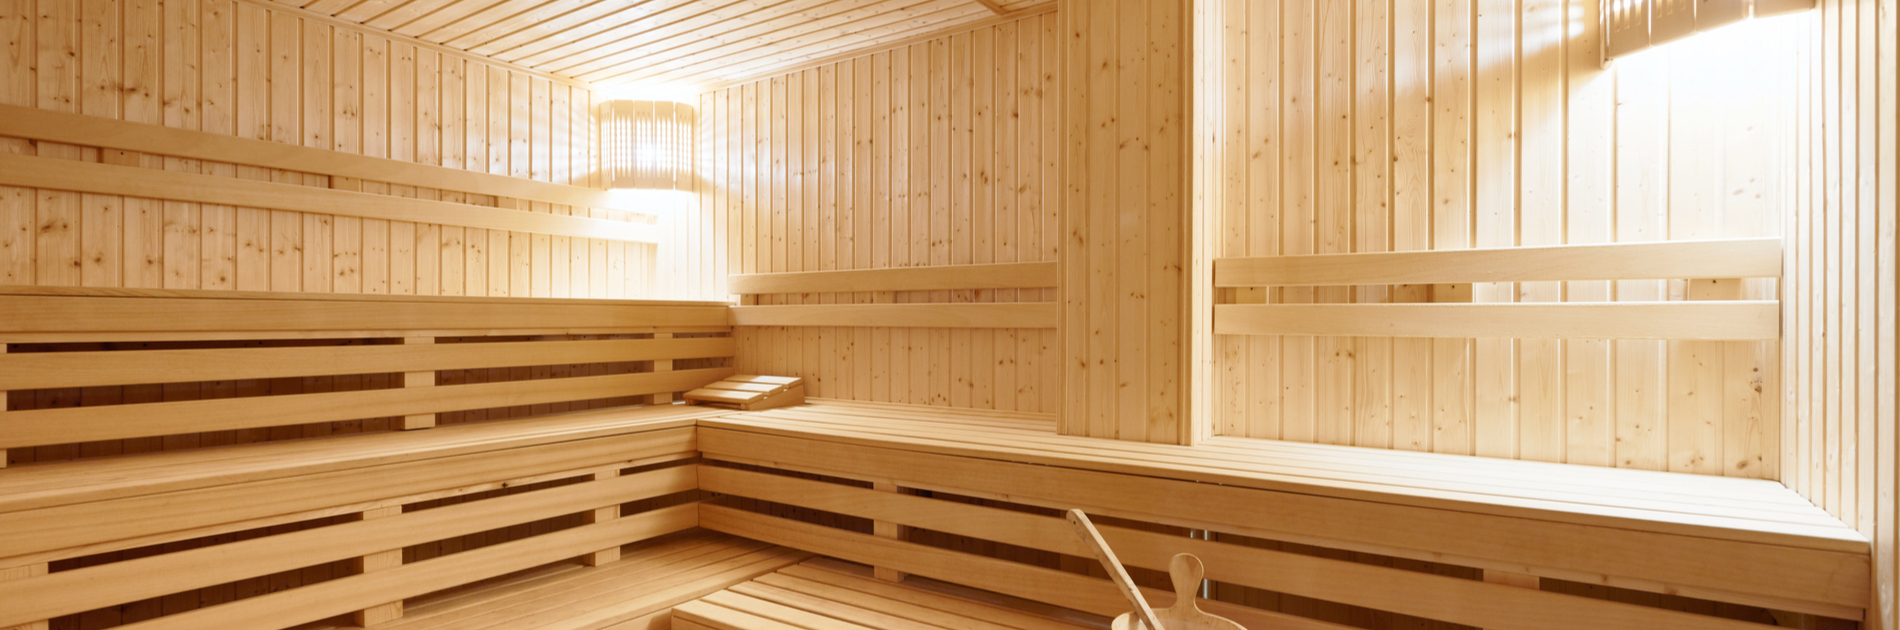 Features and effects of Finnish and Turkish sauna